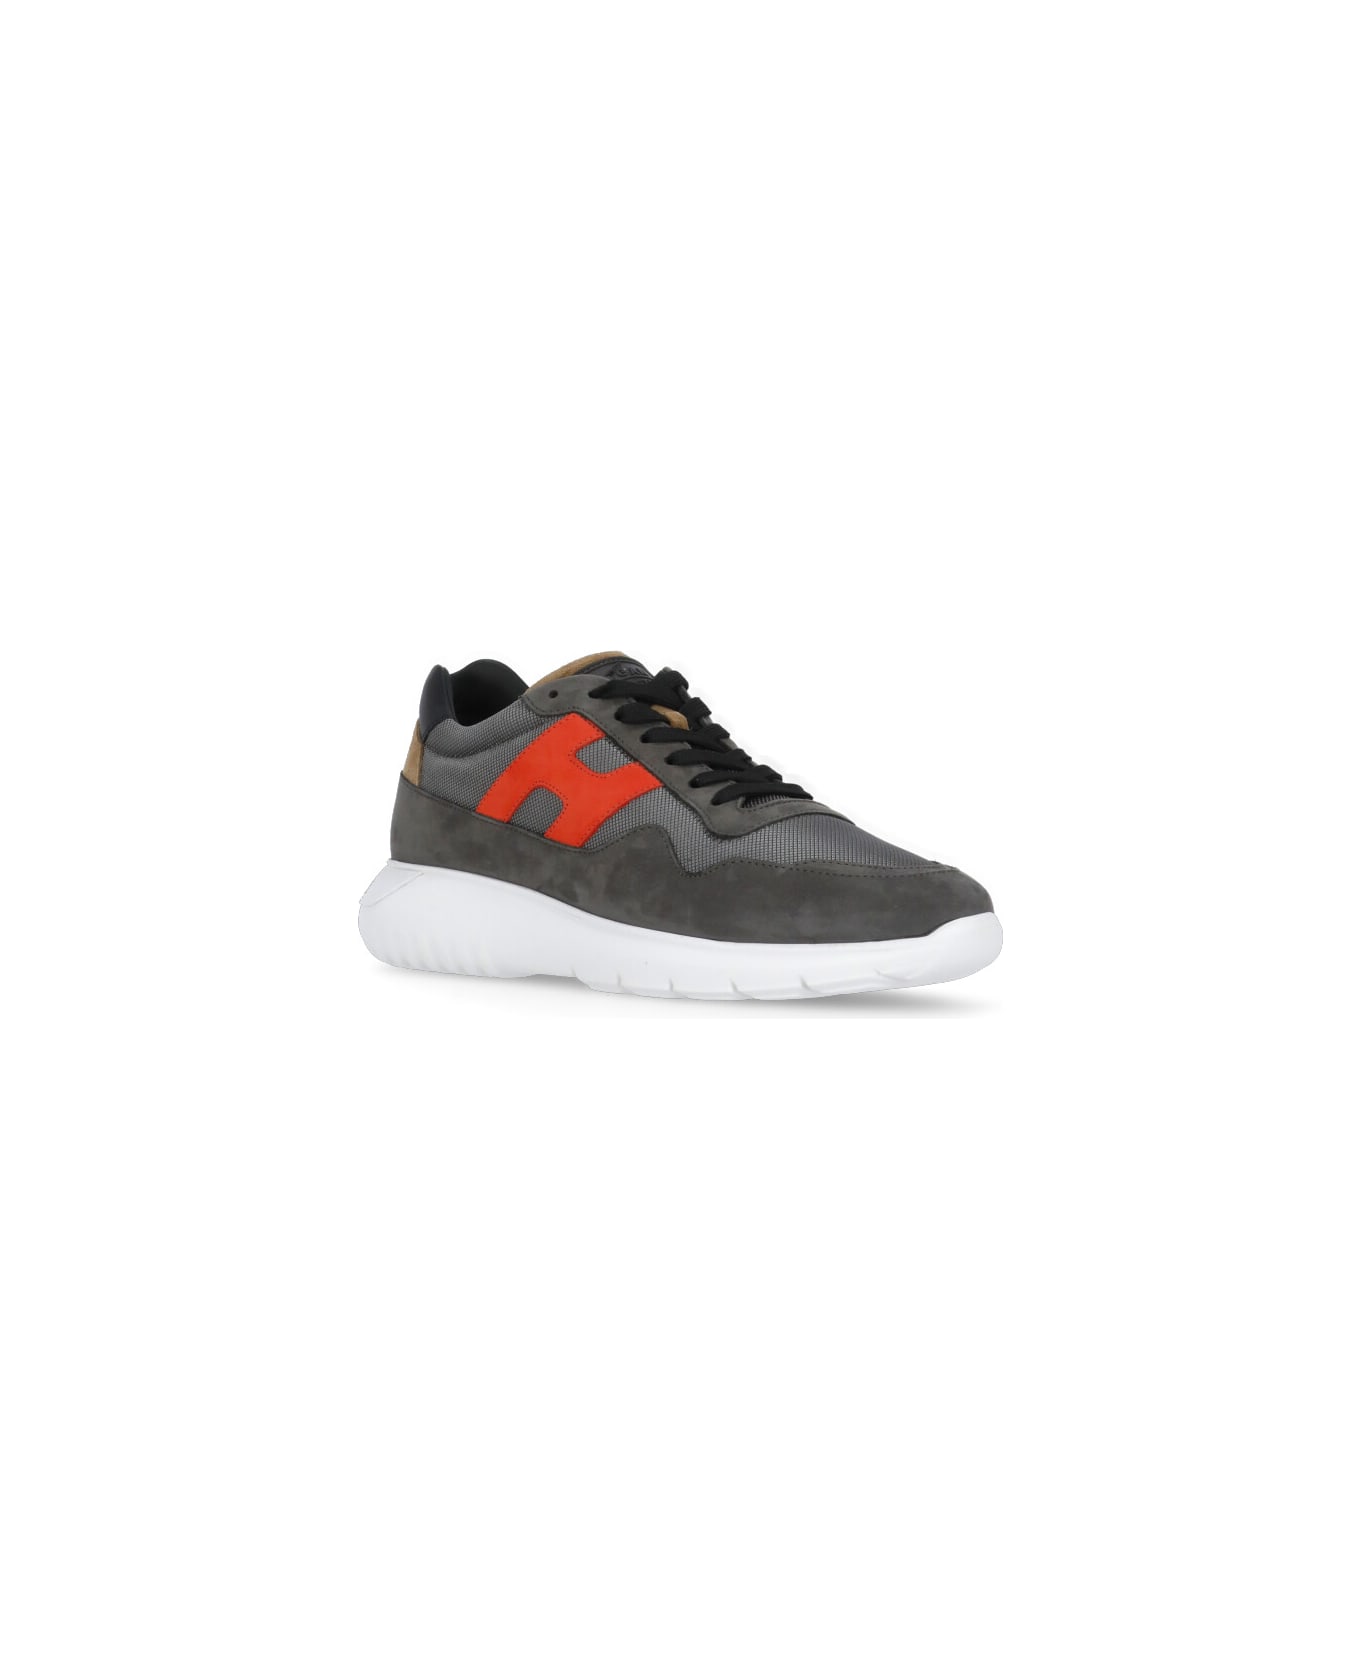 Hogan Interactive 3 Lace-up Sneakers - Grey